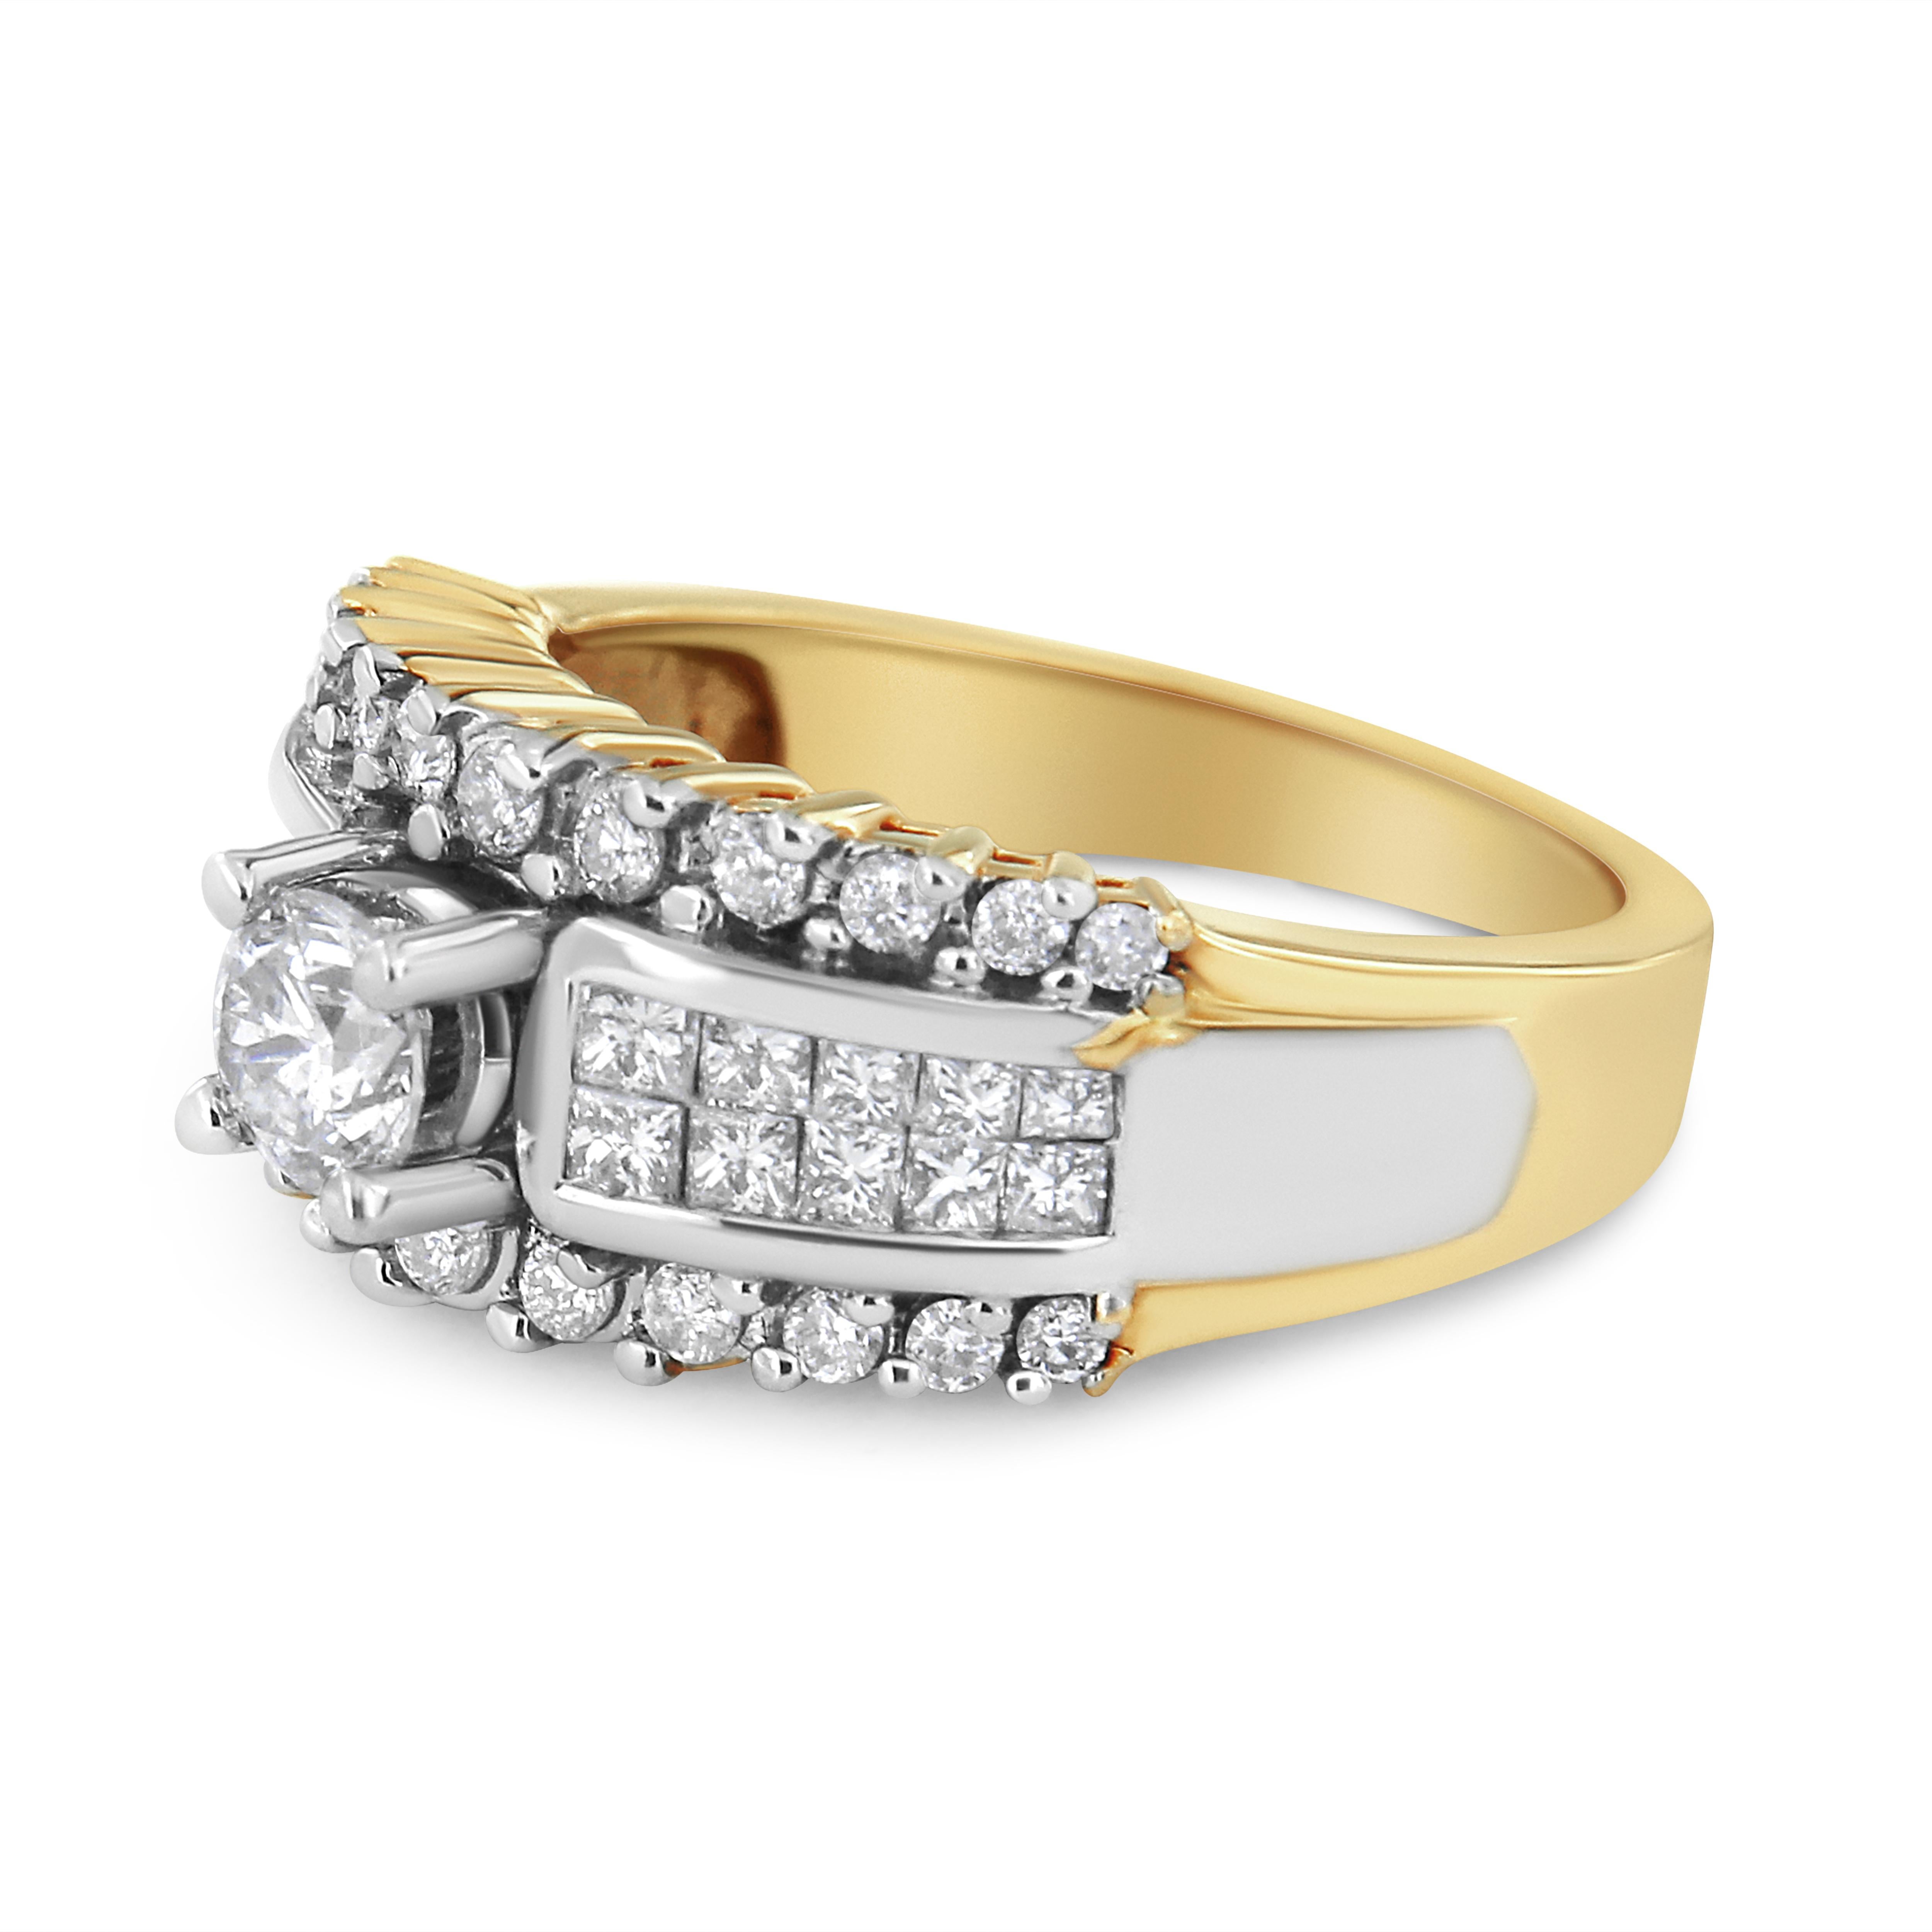 Trade in your simple bands for this glamorous ring with a stunningly bold design embellished with 1 1/2 cttw of natural, sparkling diamonds. The yellow gold band has a streak of white gold through the center that is set with princess-cut diamonds.